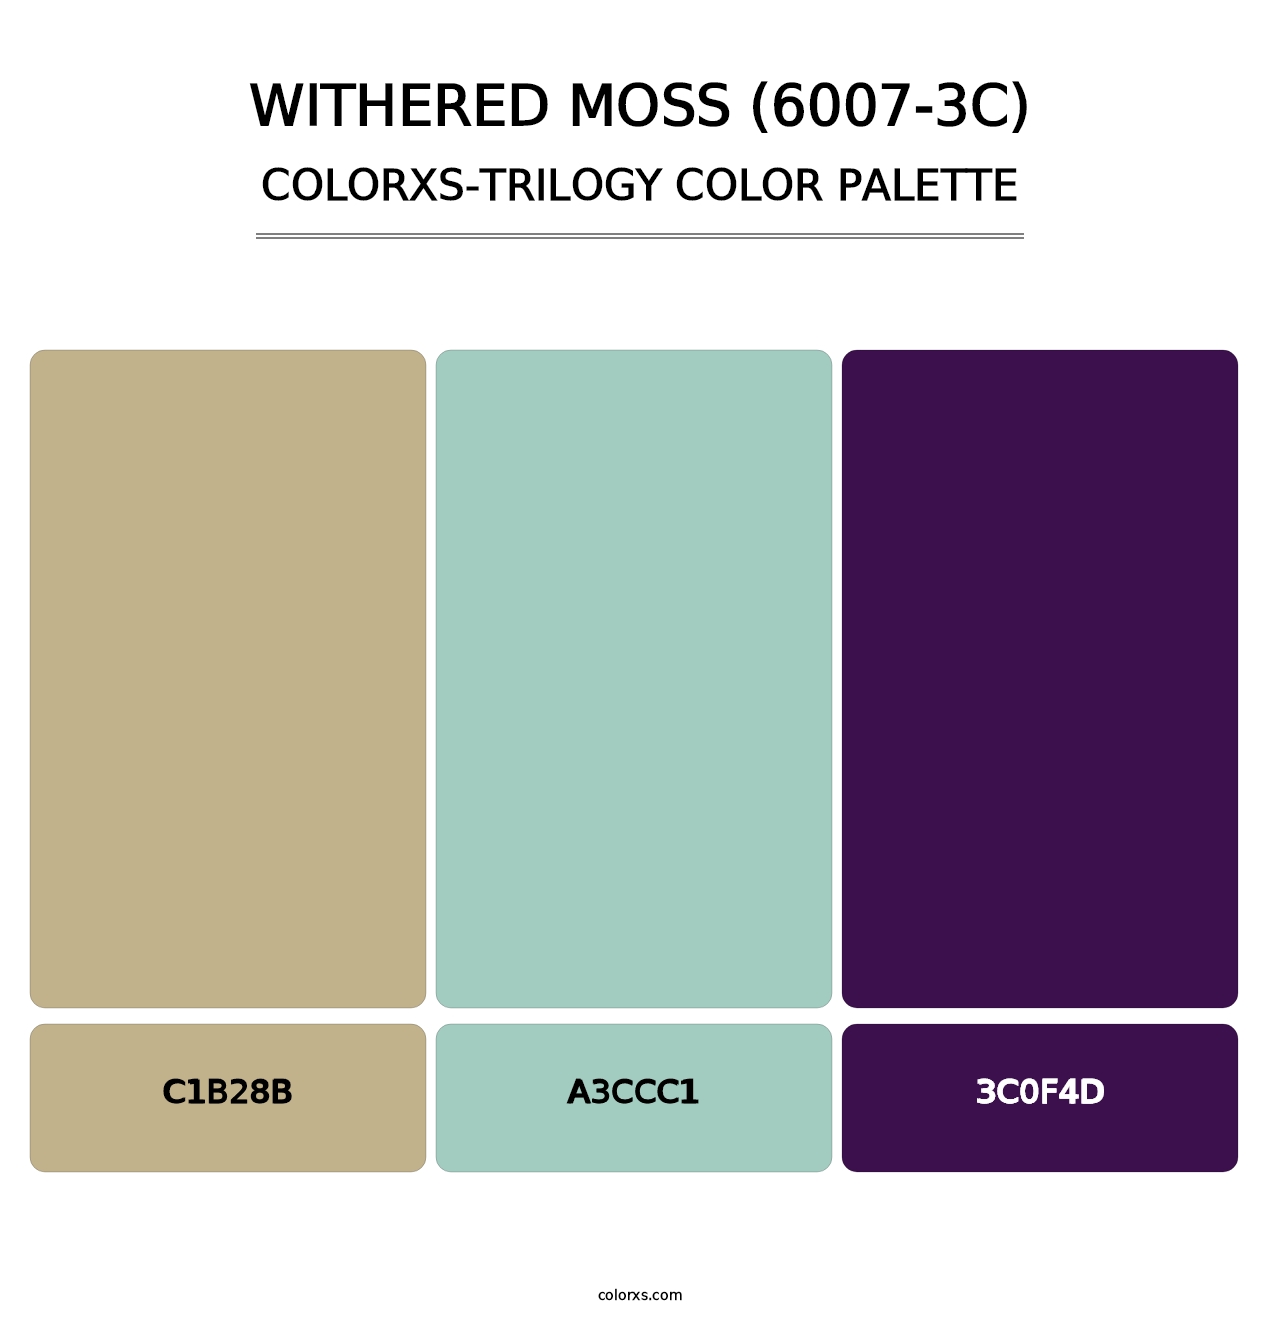 Withered Moss (6007-3C) - Colorxs Trilogy Palette